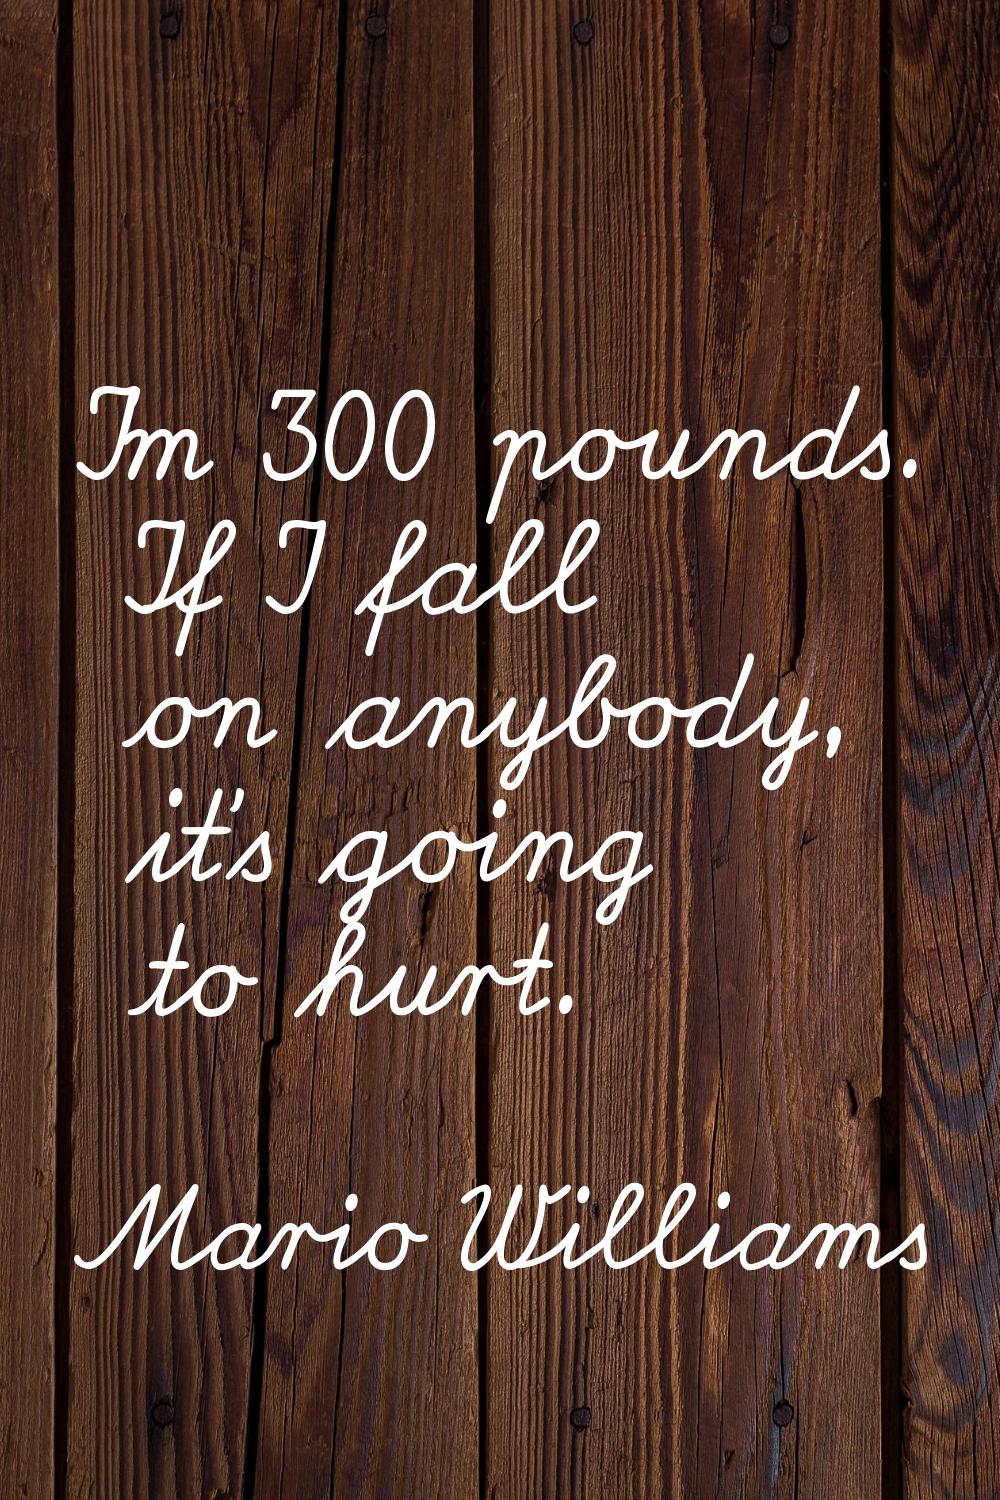 I'm 300 pounds. If I fall on anybody, it's going to hurt.